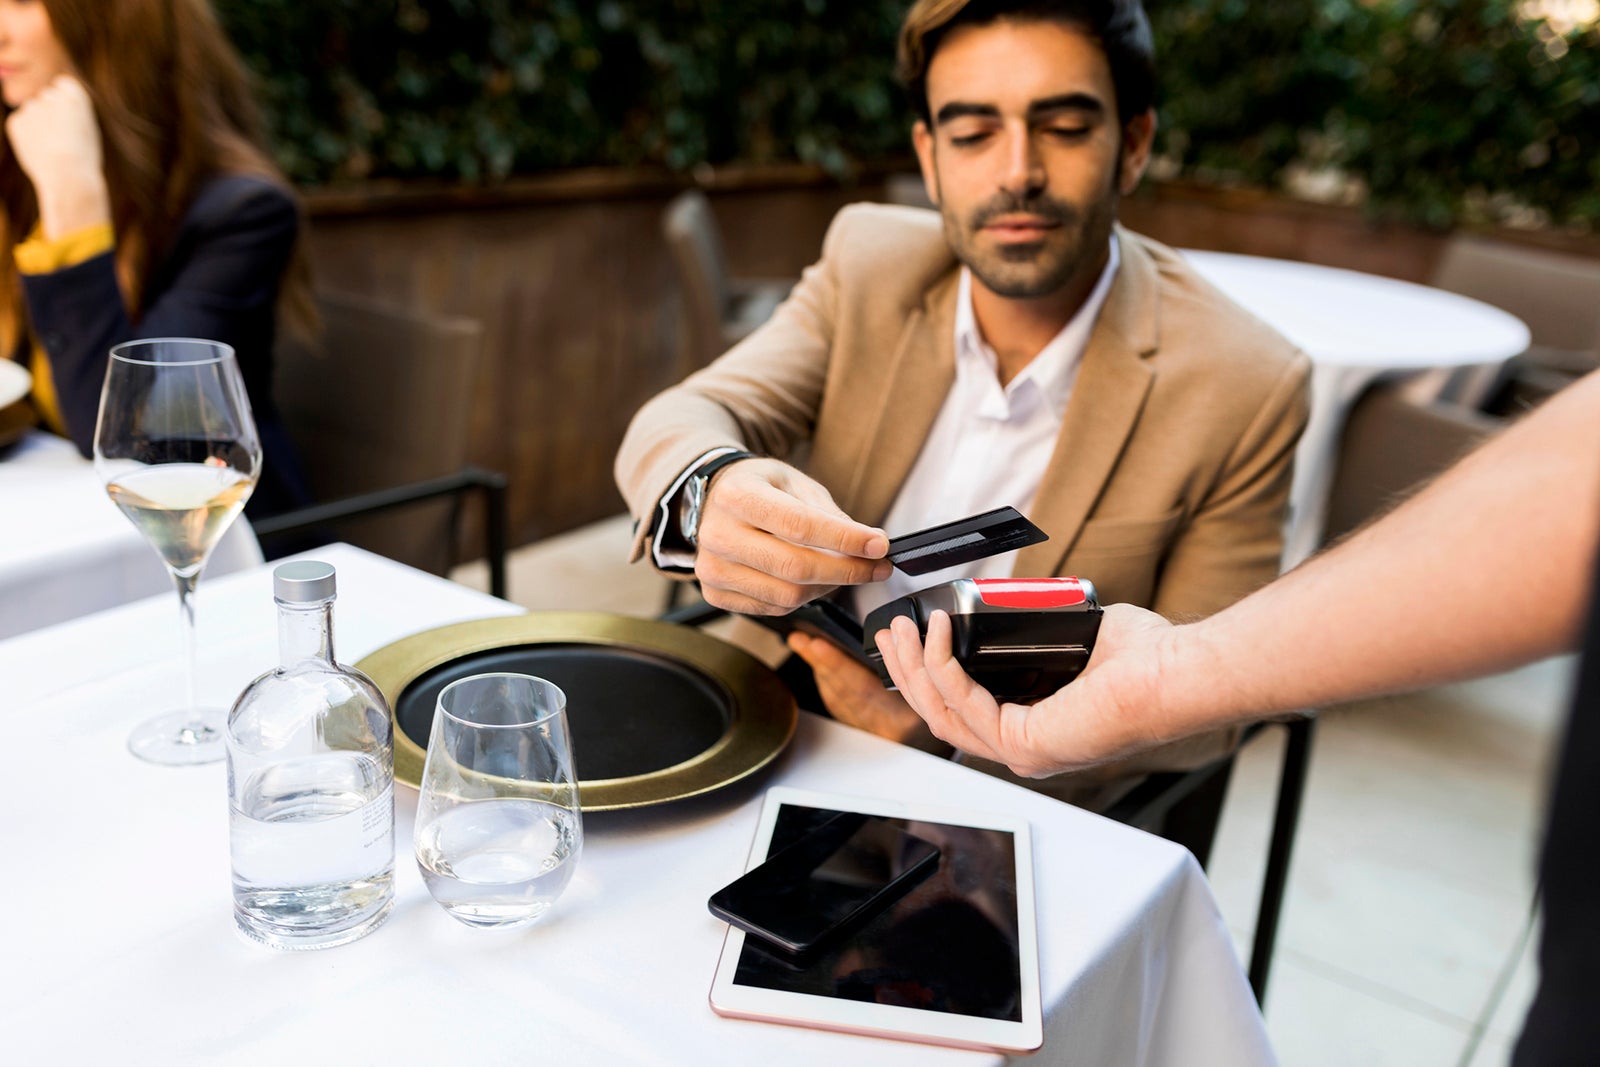 Man paying with credit card in a restaurant